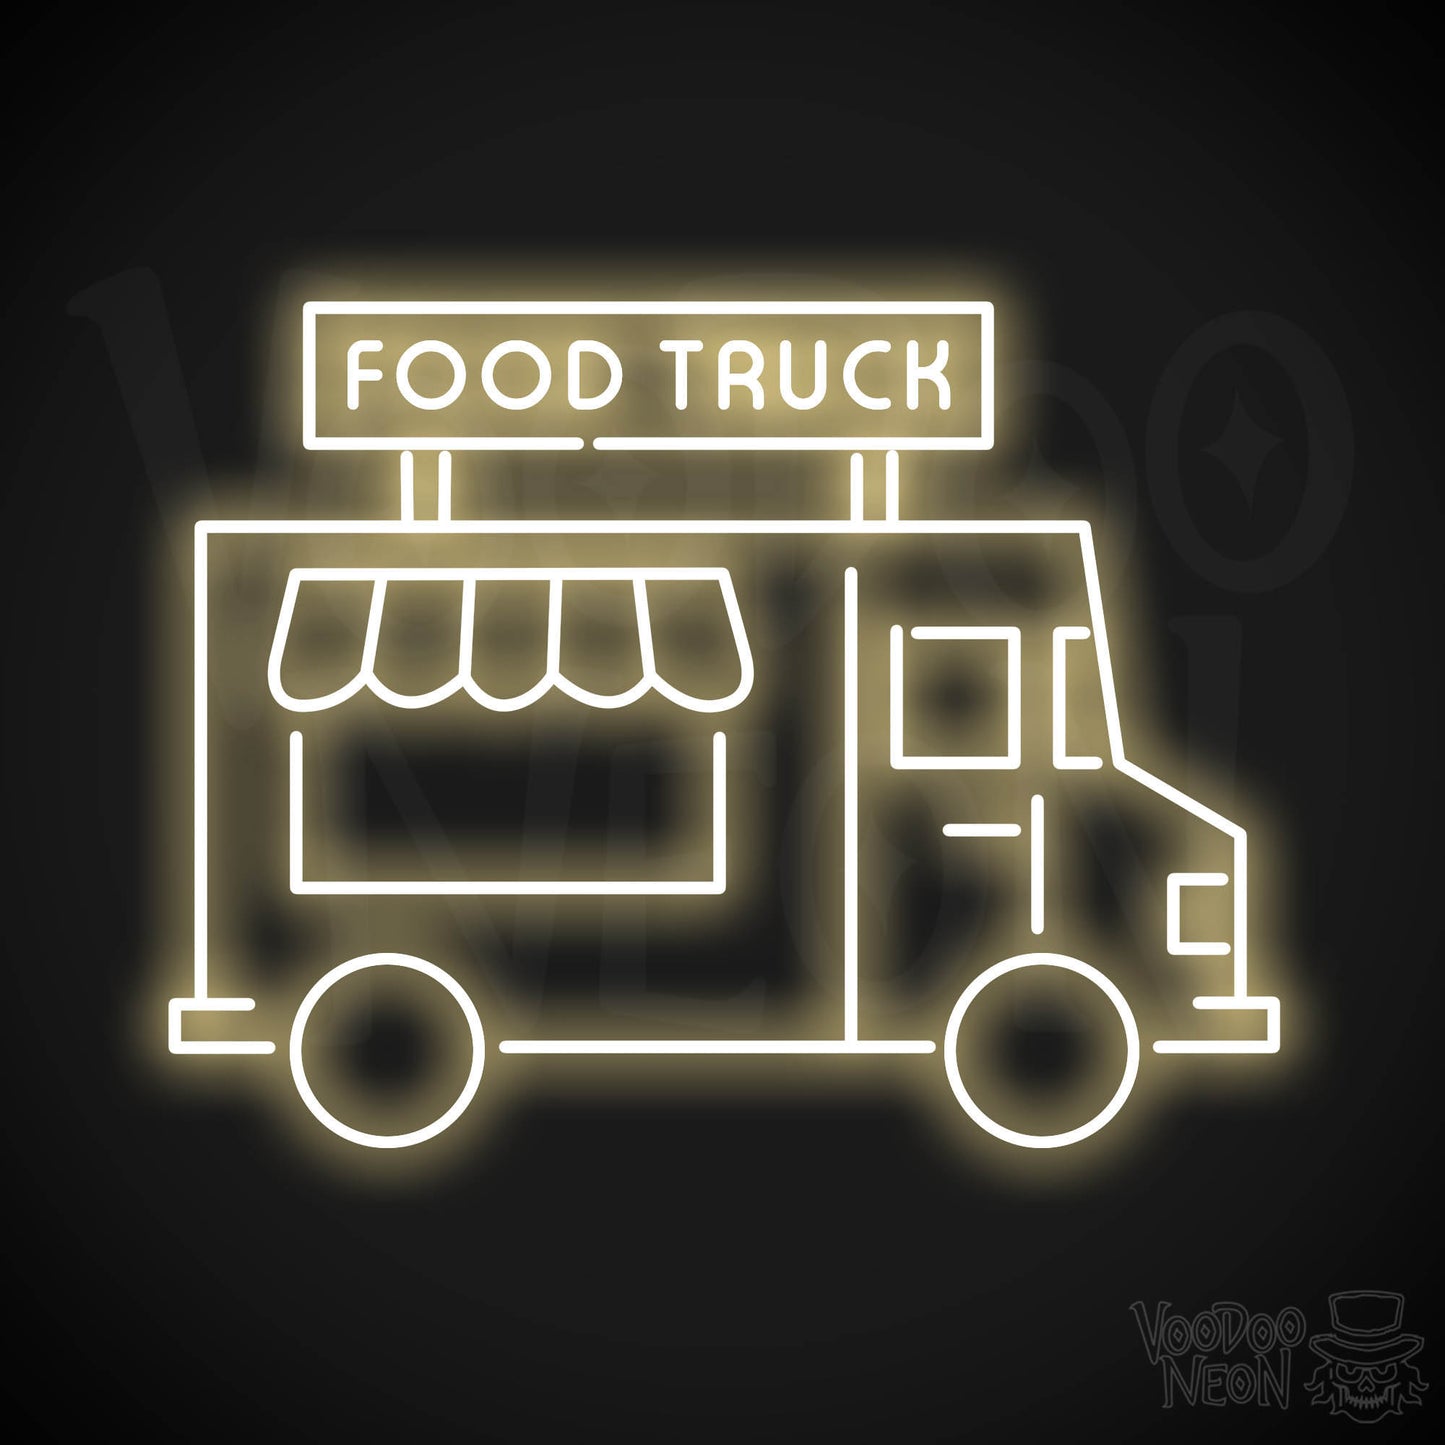 Food Truck LED Neon - Warm White